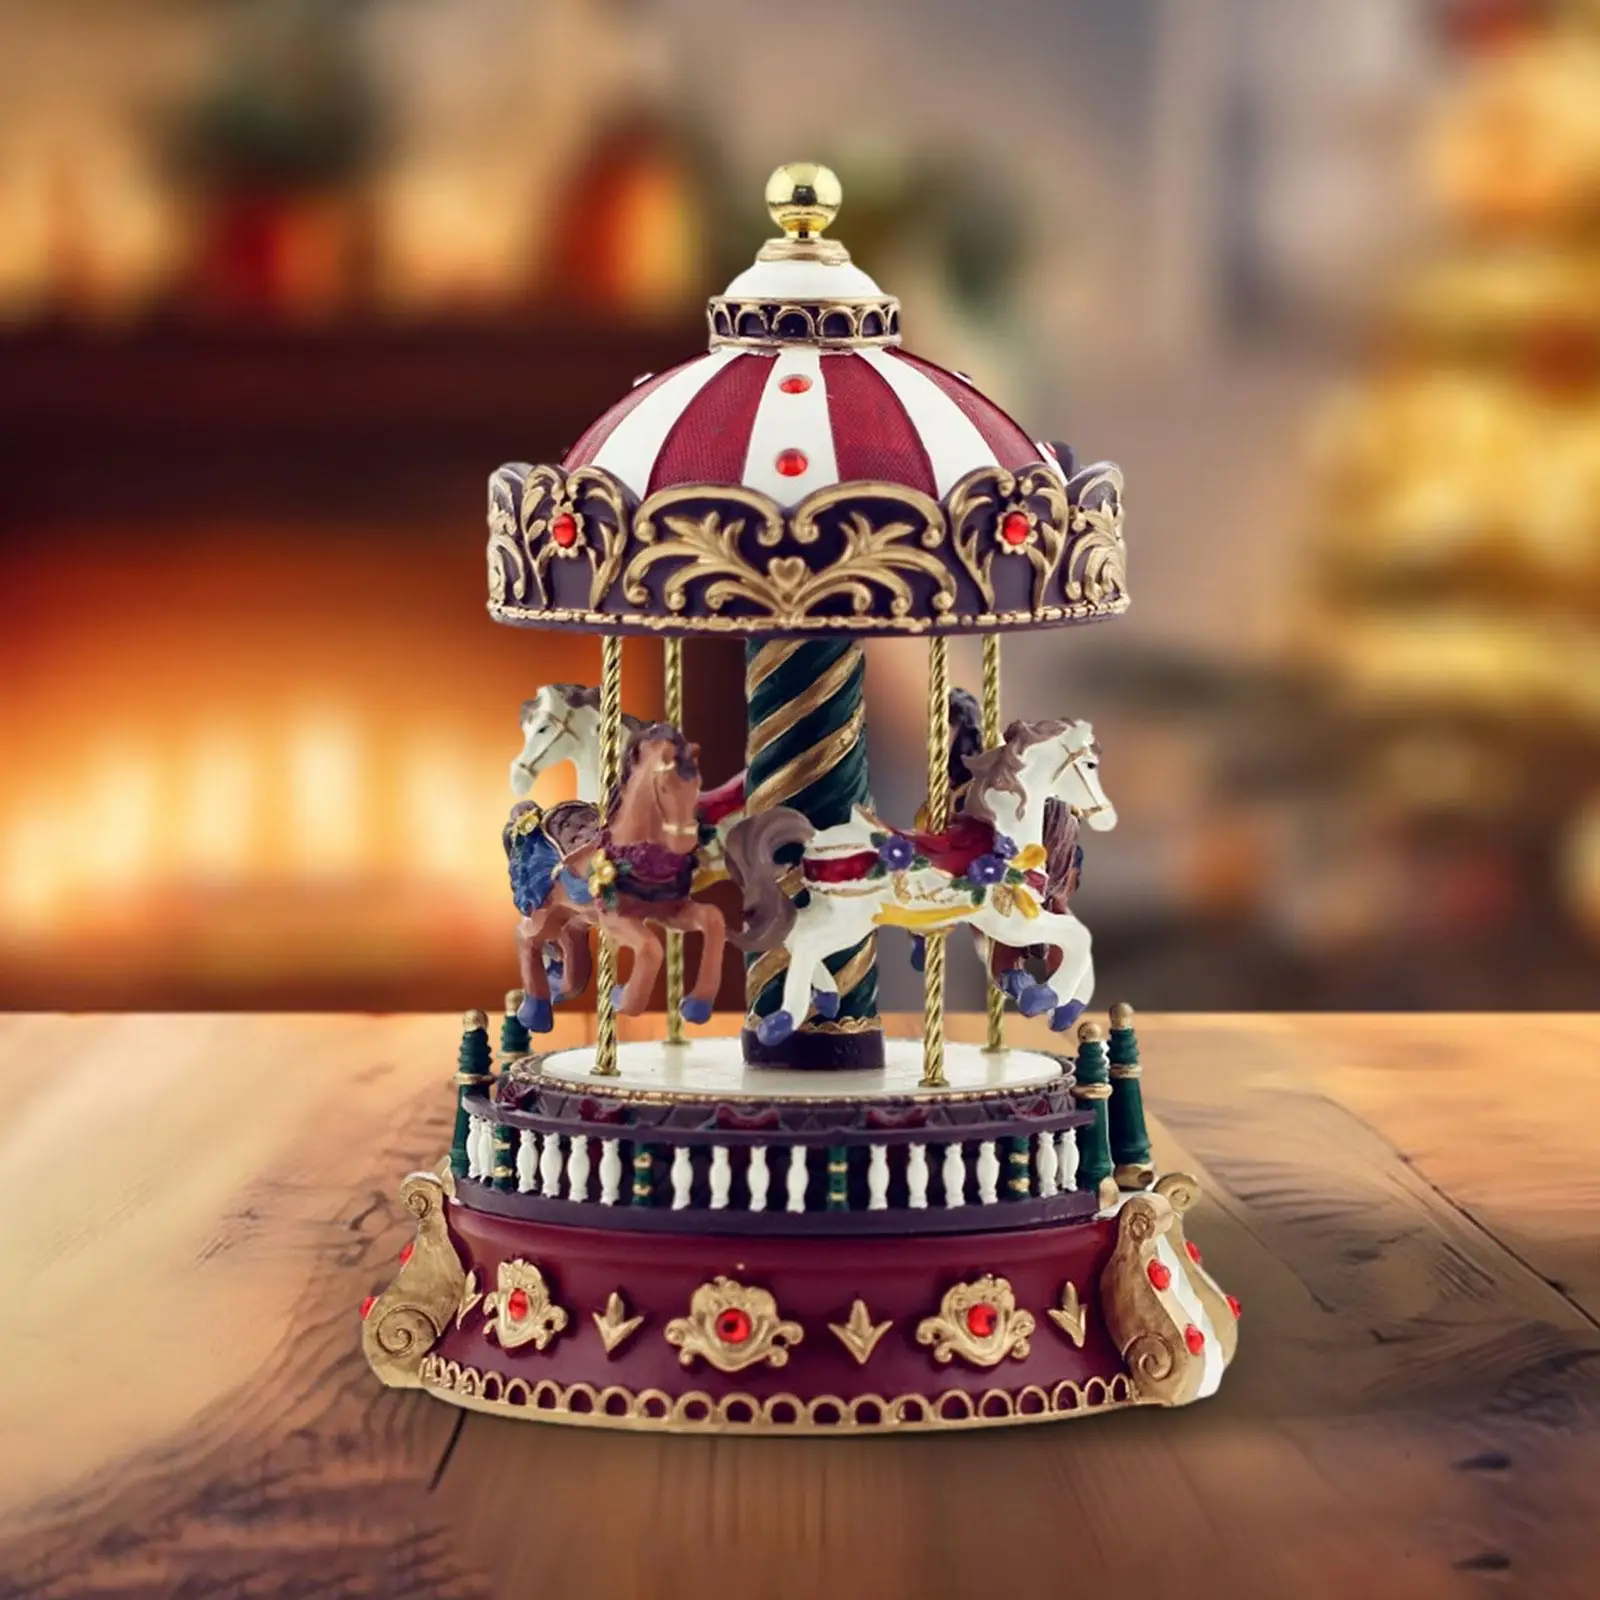 Carousel Music Box Valentines Day Gifts Holiday Decoration Desktop Ornament for Office Table Bedroom Desk Birthday Gifts